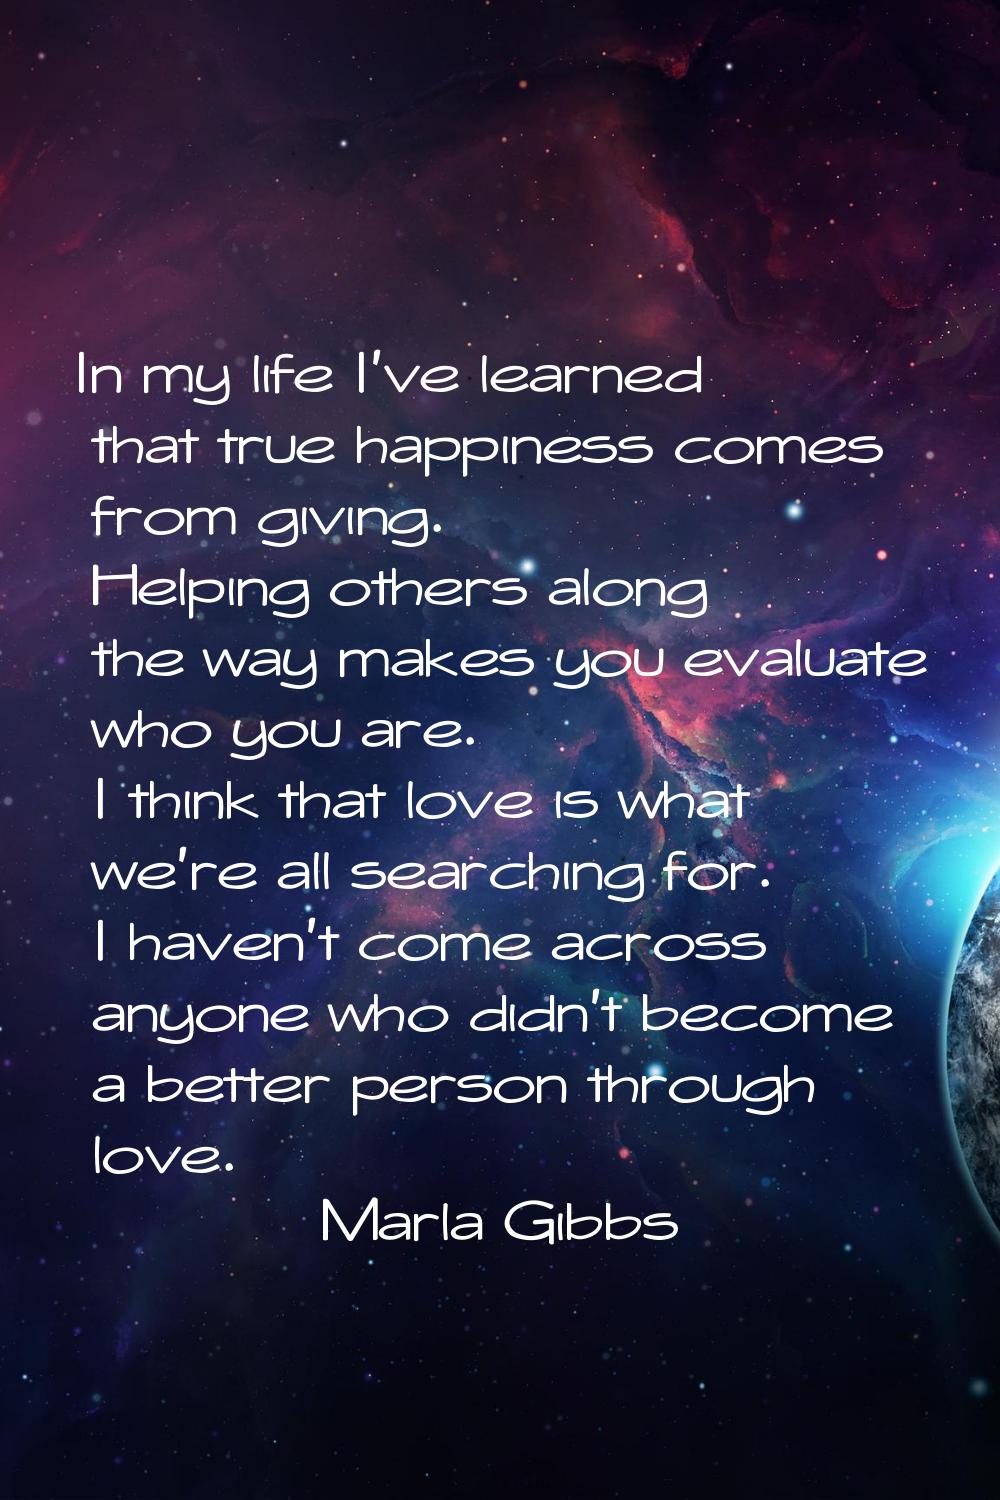 In my life I've learned that true happiness comes from giving. Helping others along the way makes y